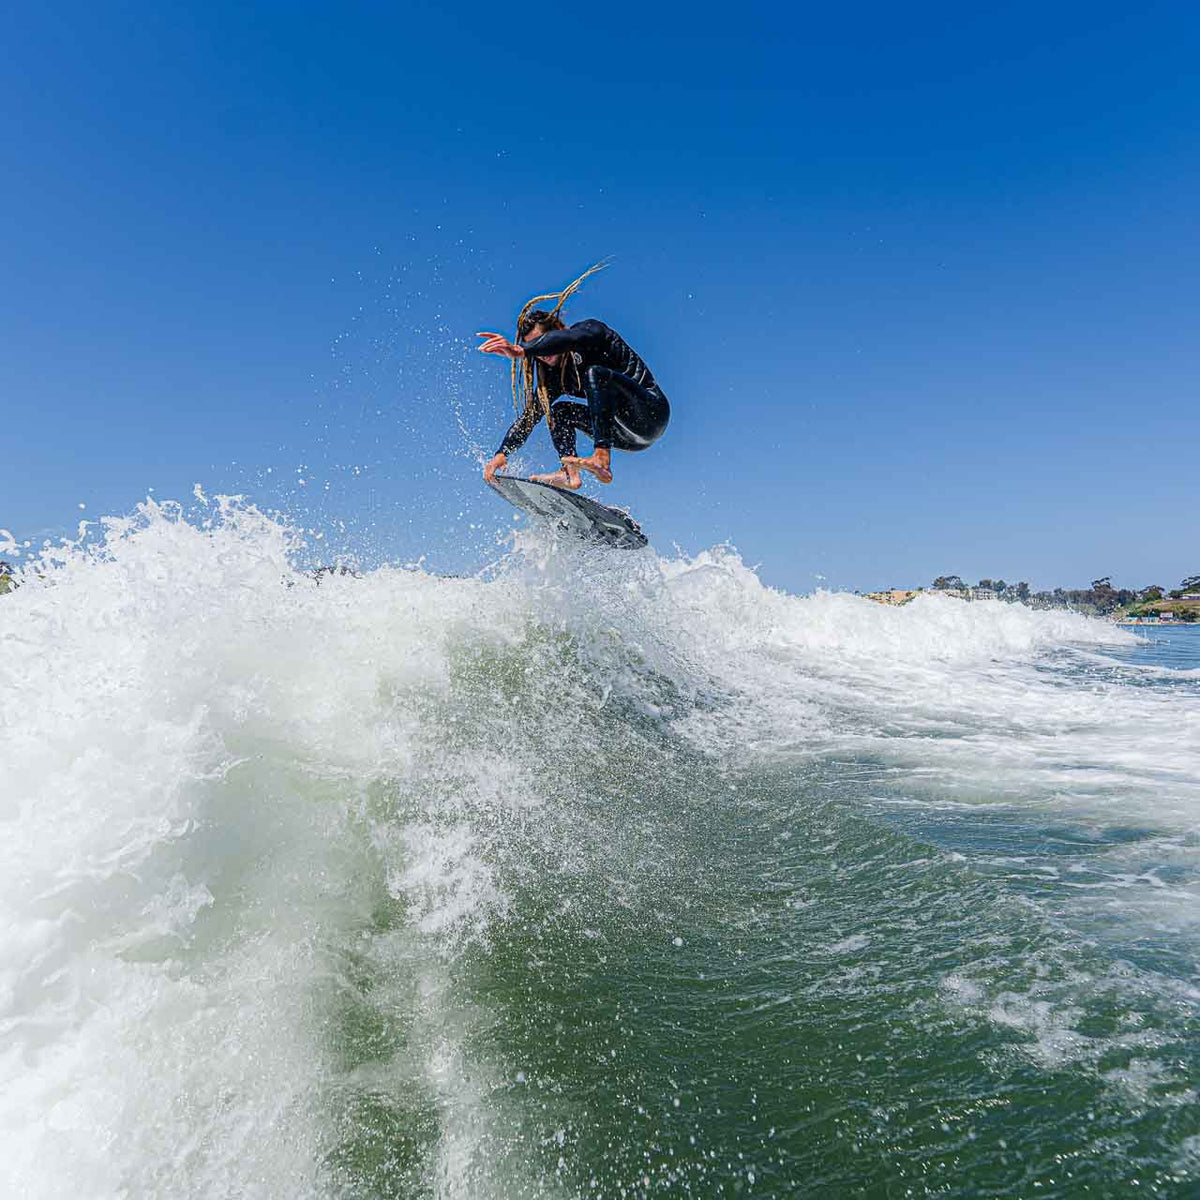 Austin Keen in the water boosting his pro skimboard